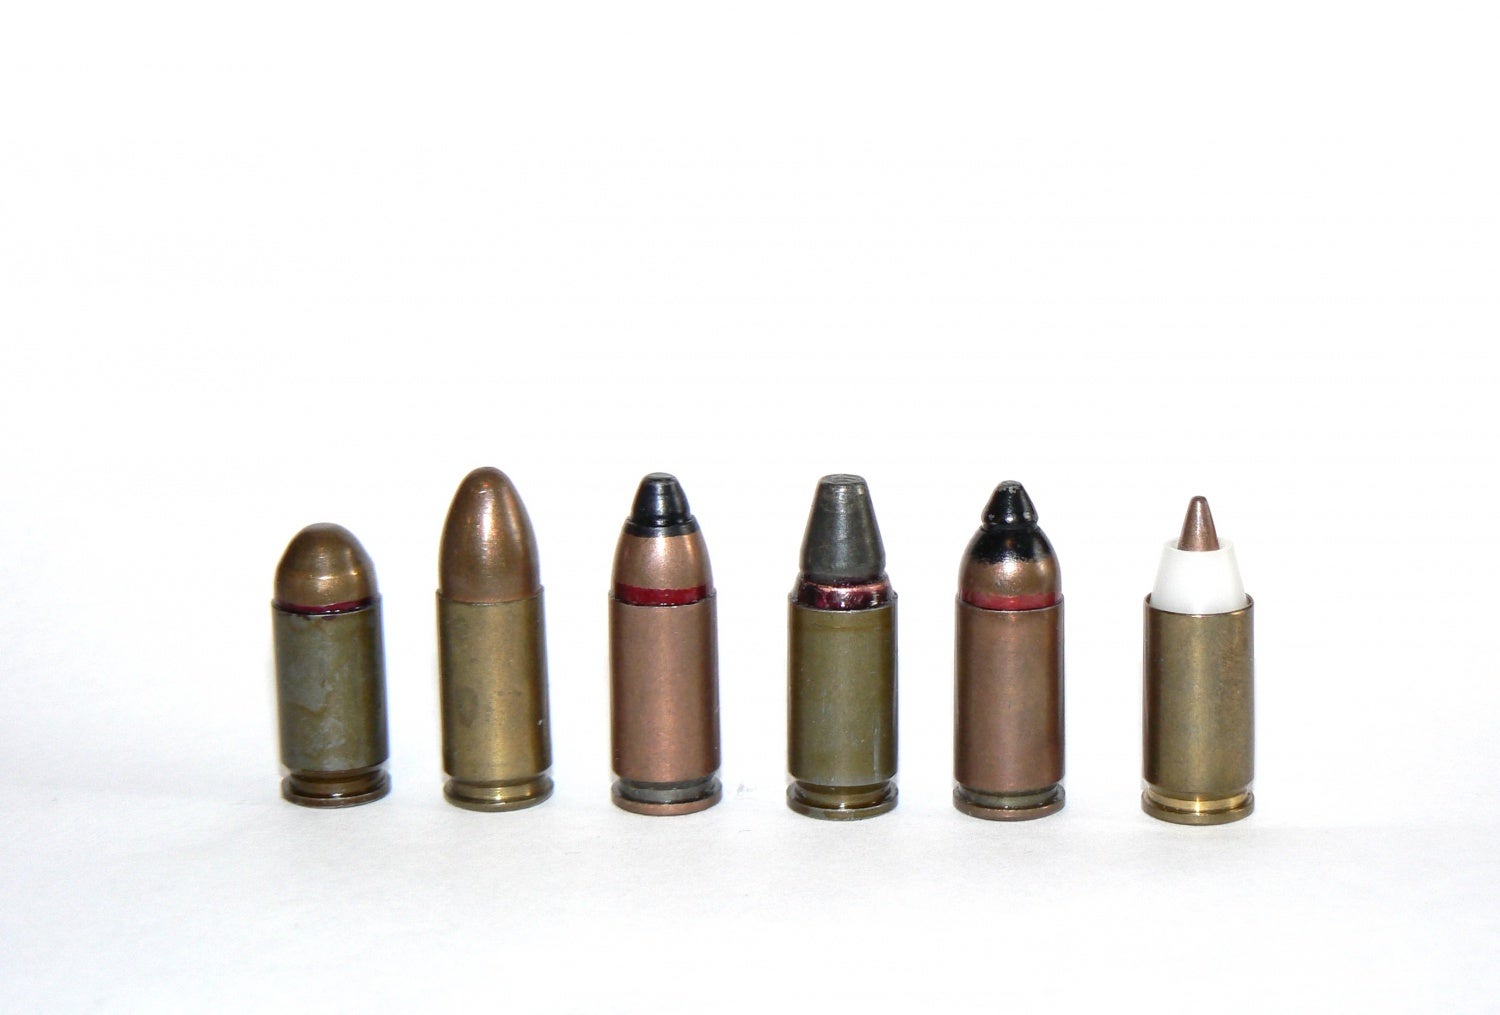 Modern Personal Defense Weapon Calibers 010: The 9x19mm and 9x21mm Russia.....